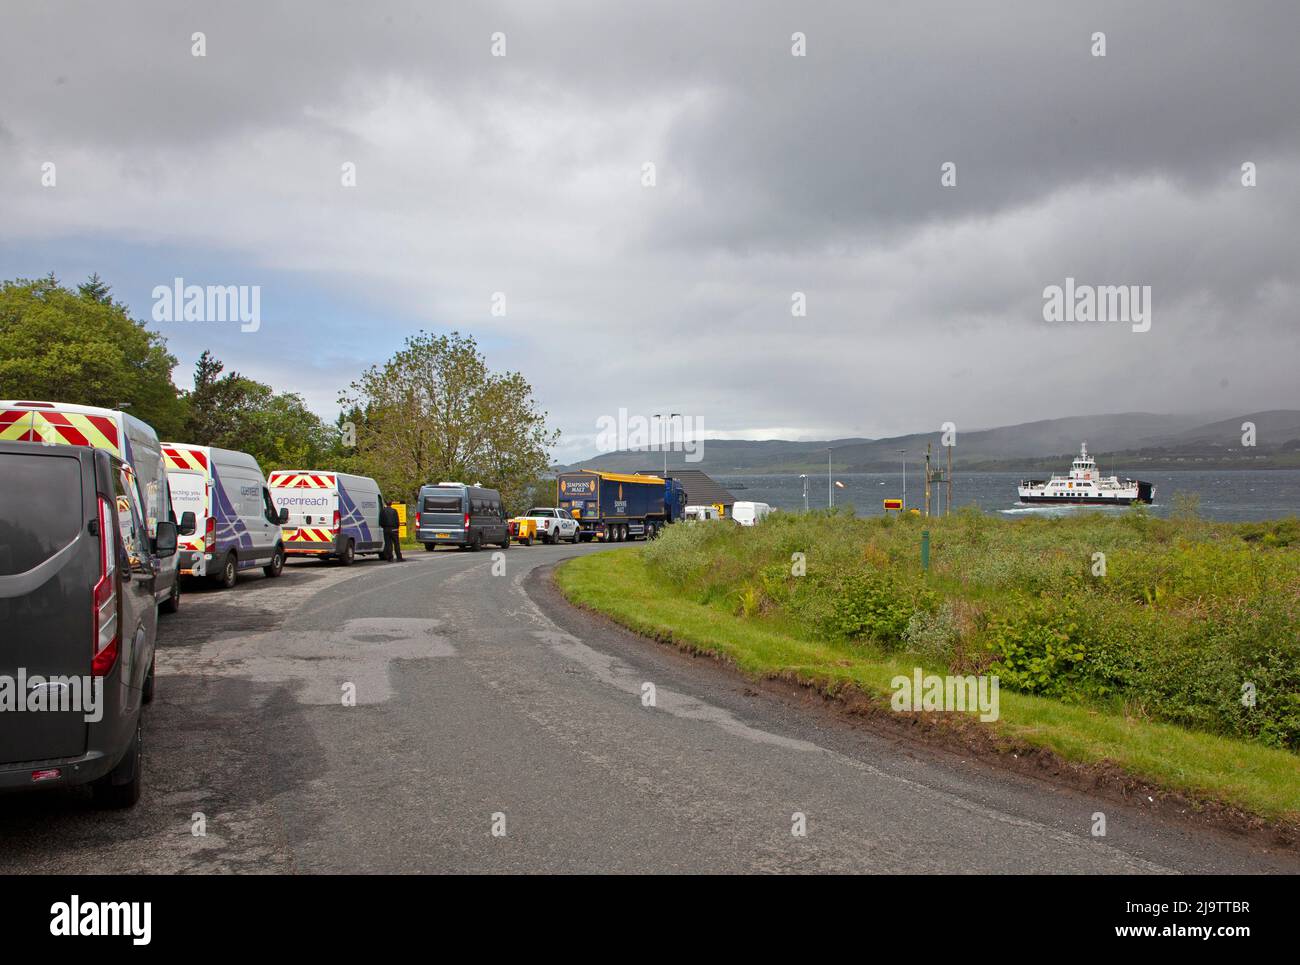 Calmac Ferry Operator, cancelled all sailings to Oban from Craignure, Isle of Mull for mechanical reasons, 25th May 2022. Forcing travellers to divert and queue to catch Lochaline ferry. Stock Photo